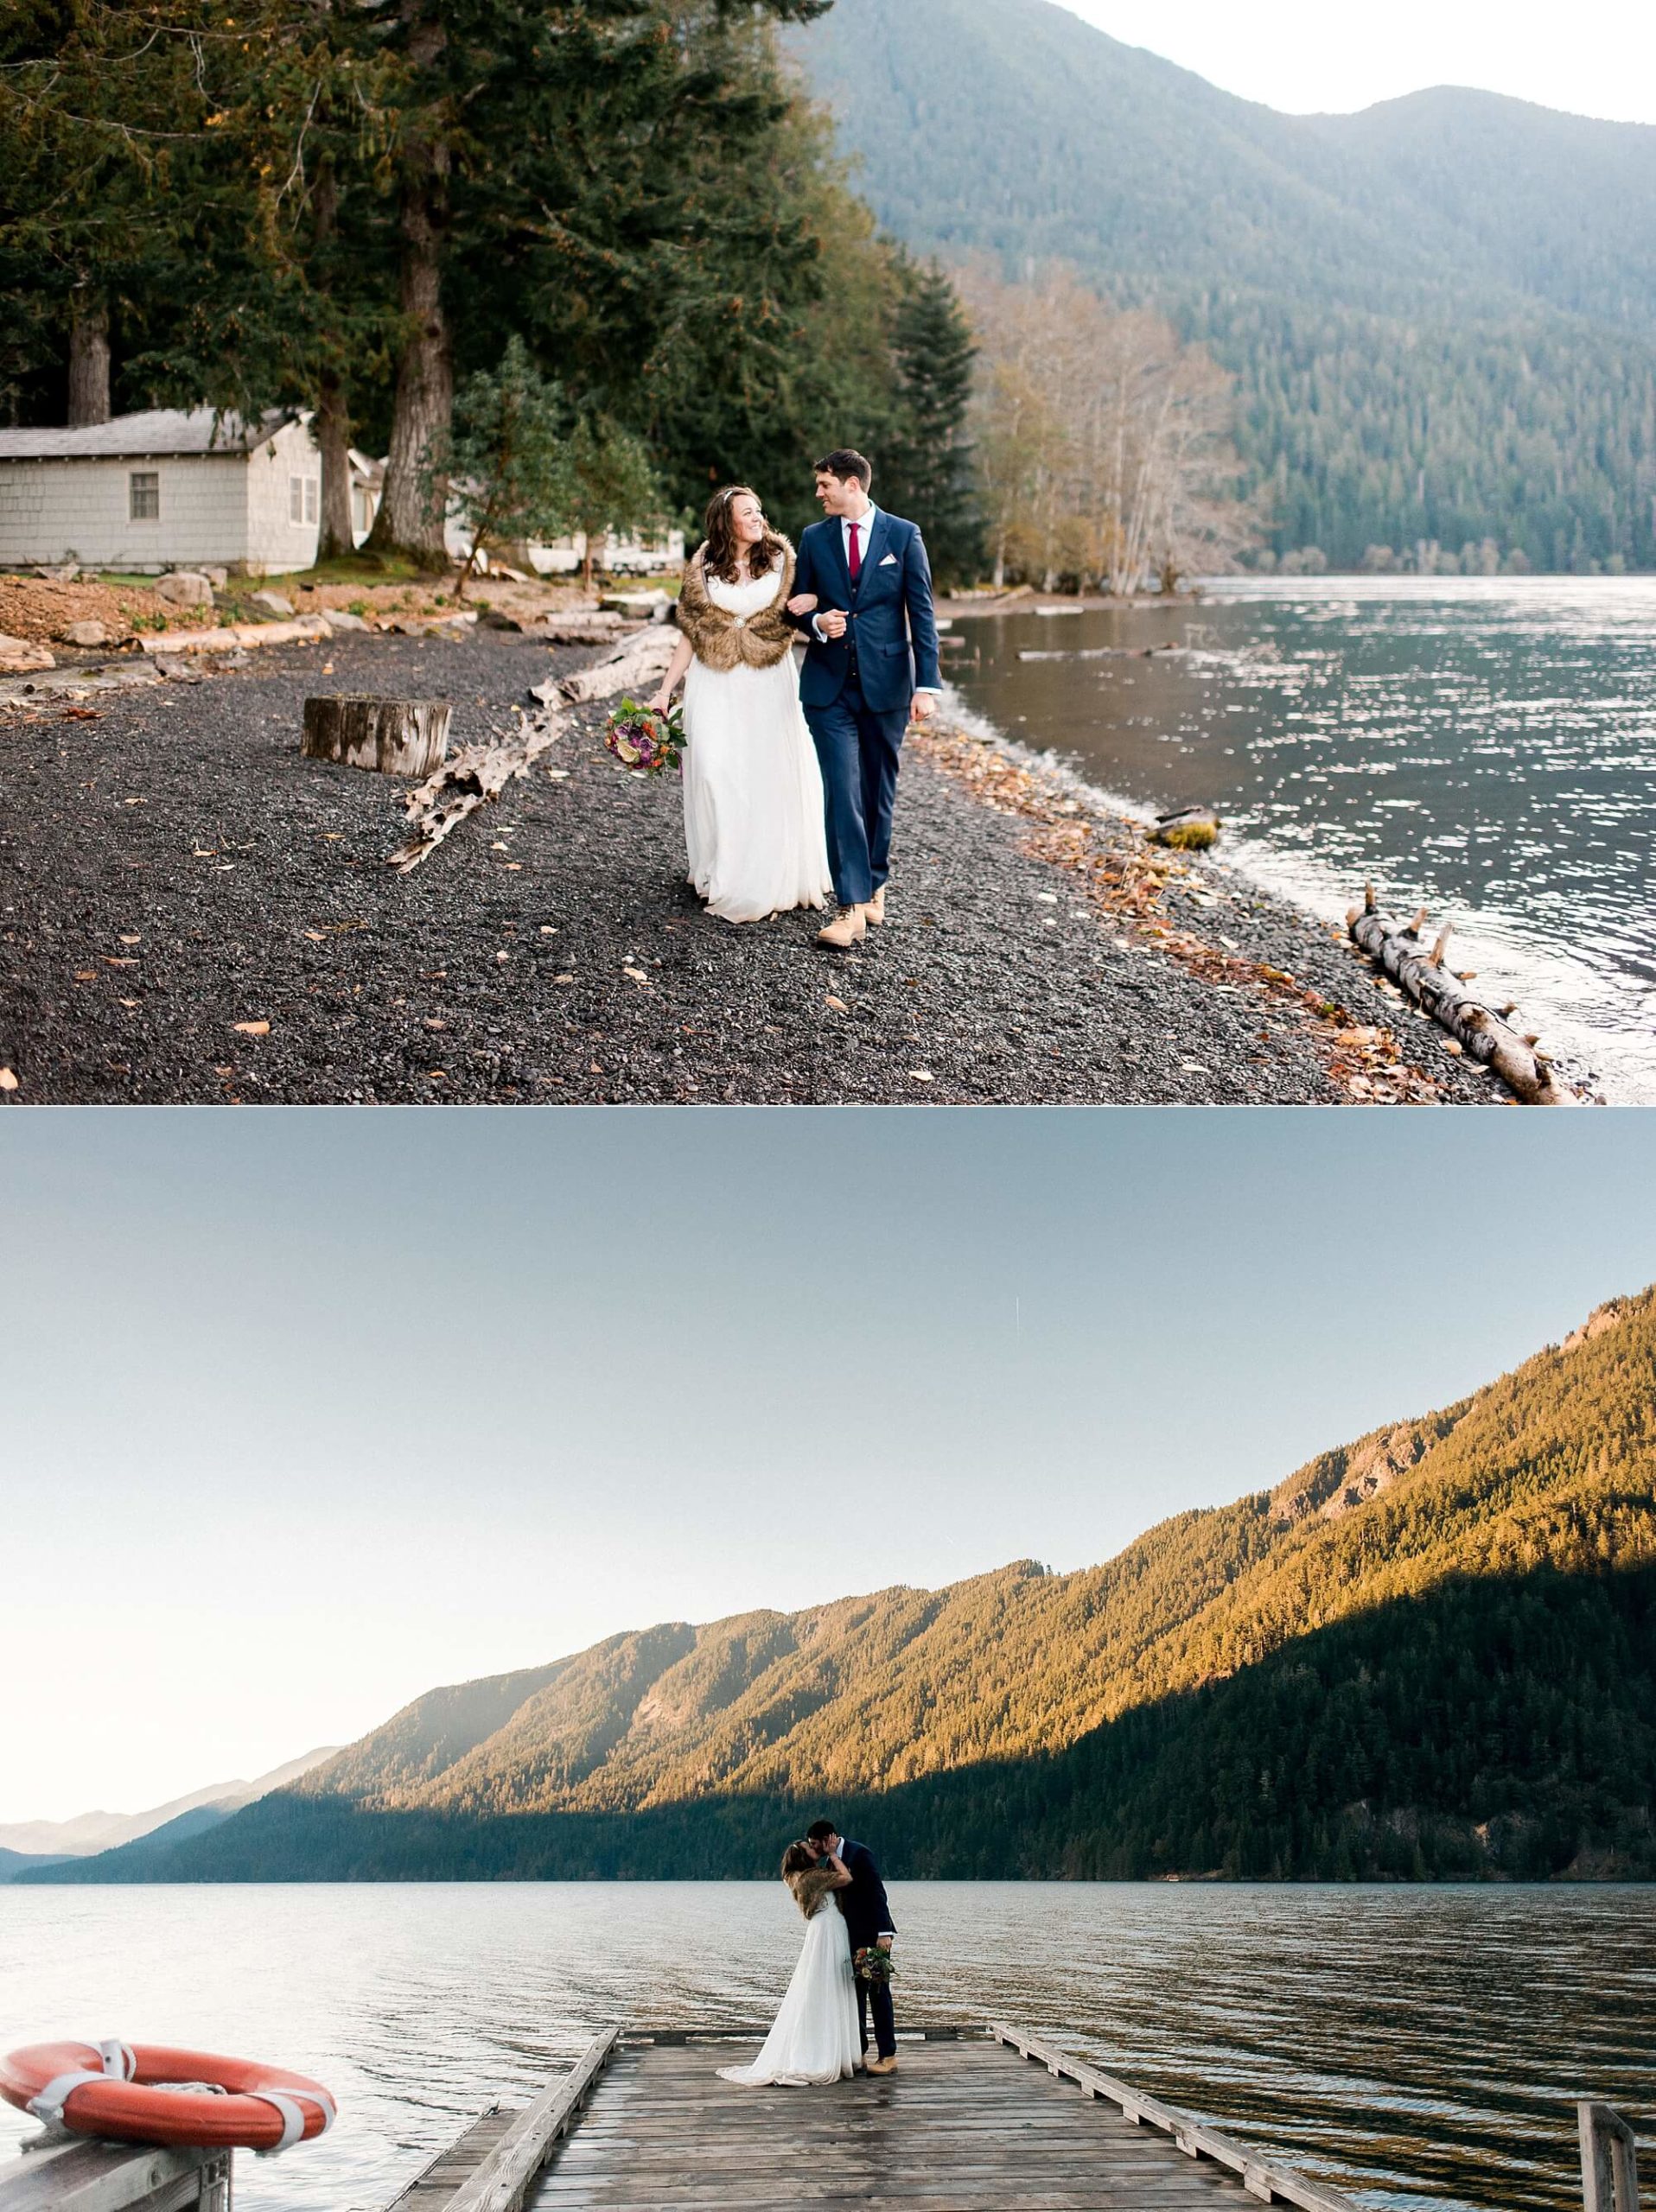 Lake Crescent Bride and Groom